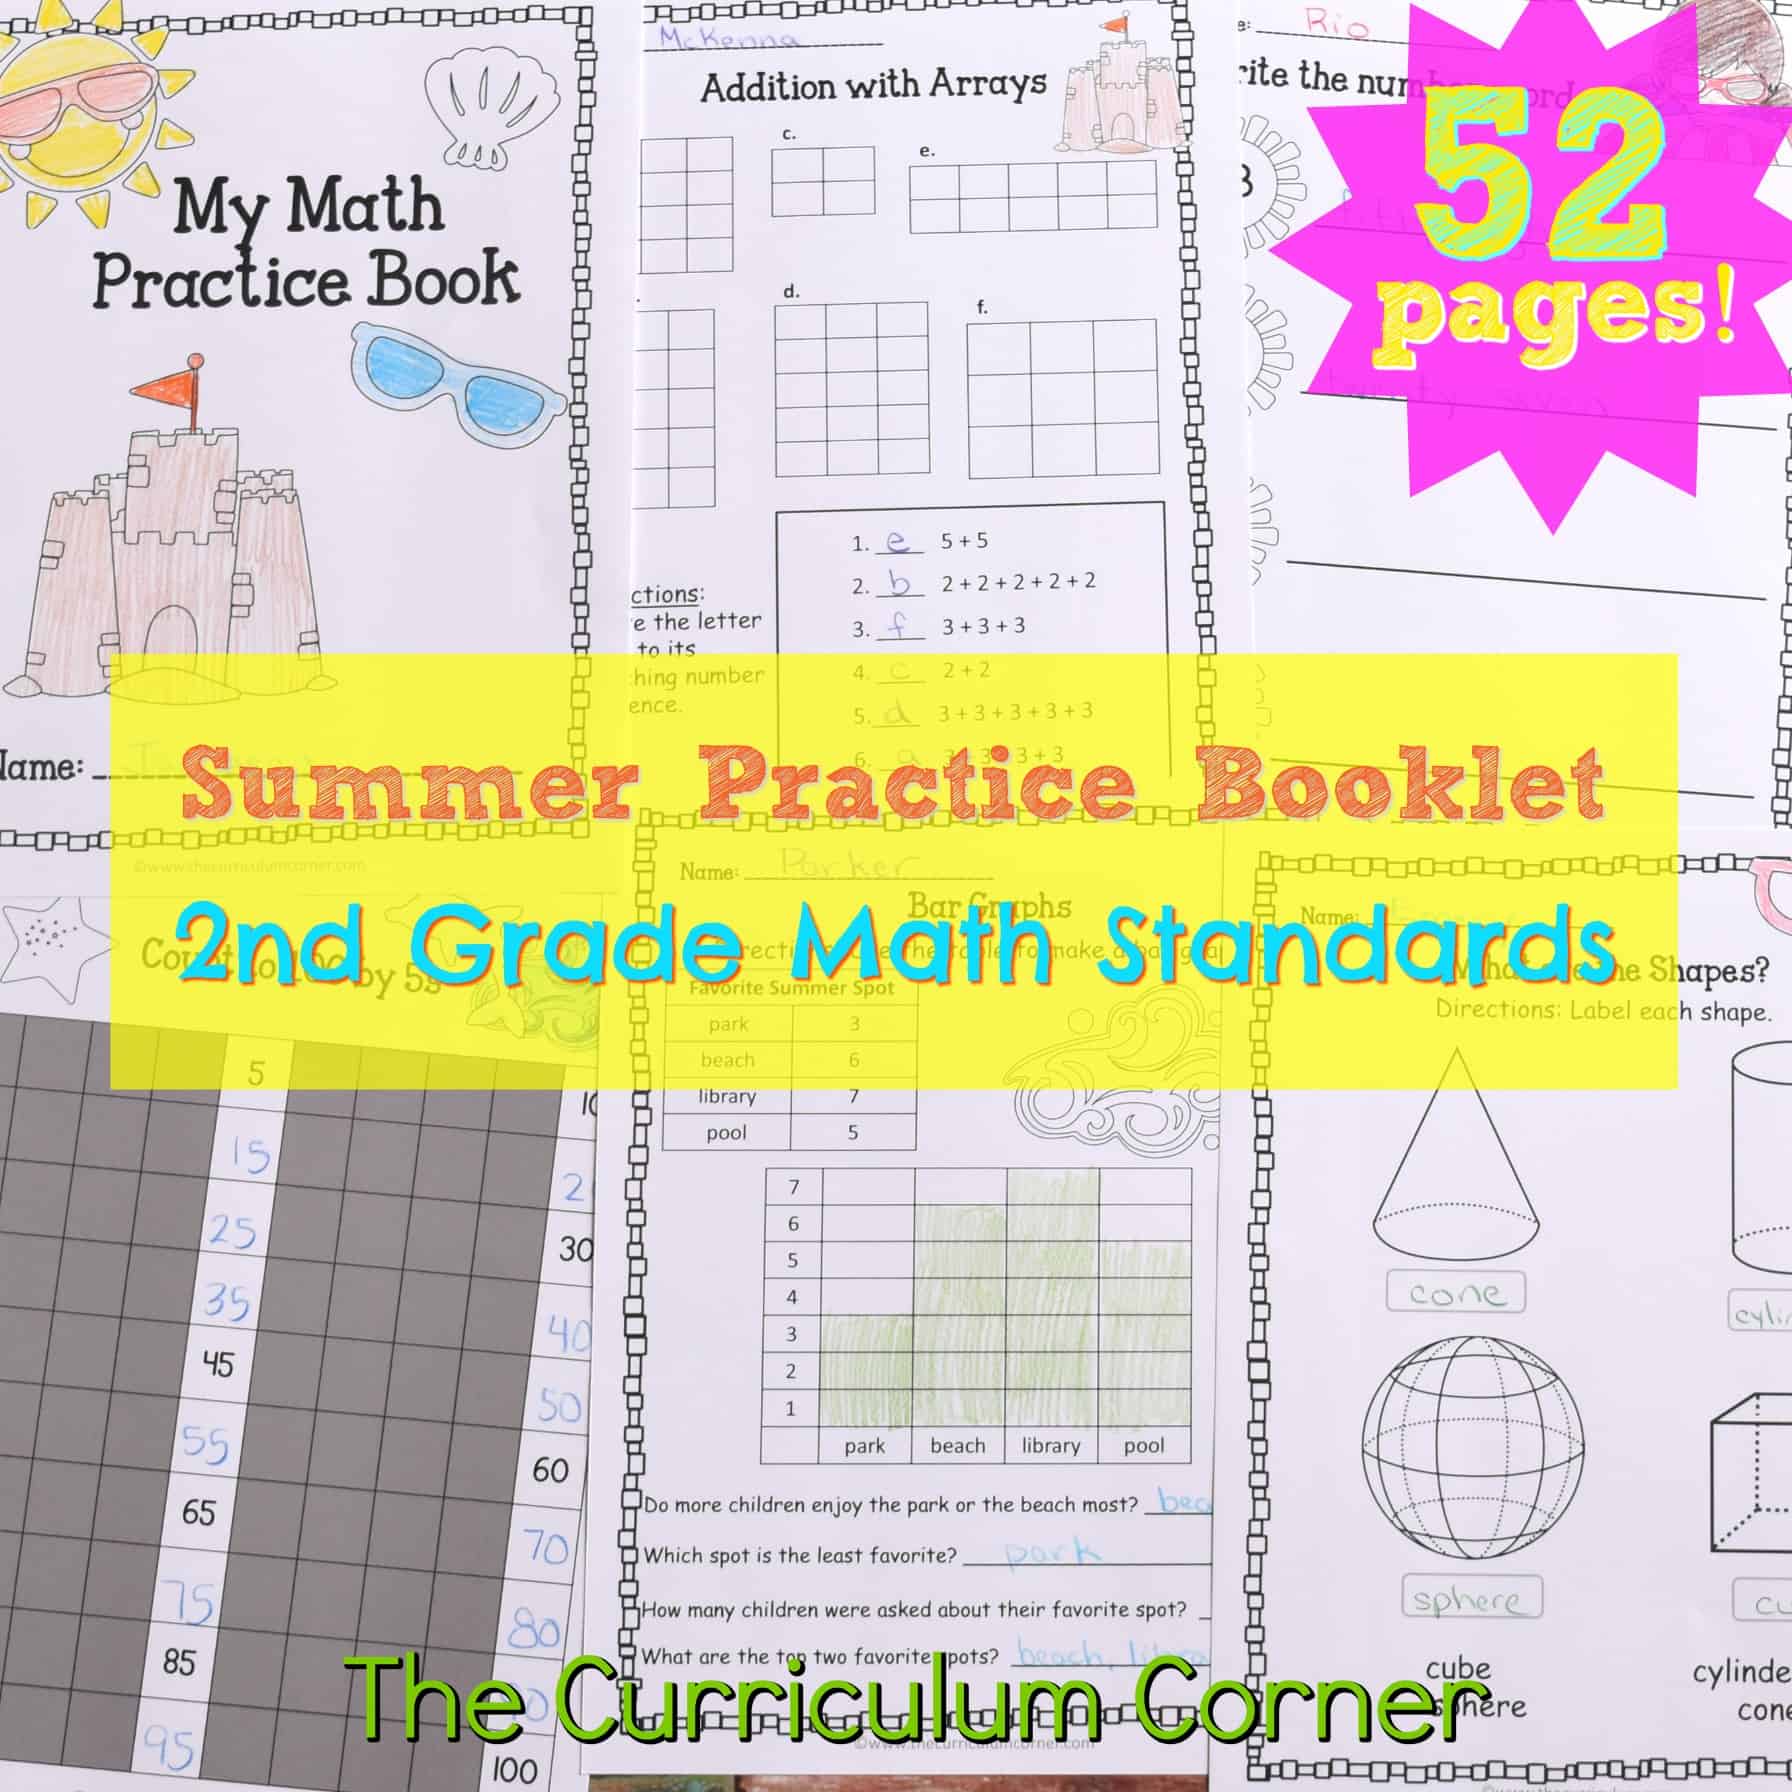 FREE Summer Math Practice Booklet from The Curriculum Corner